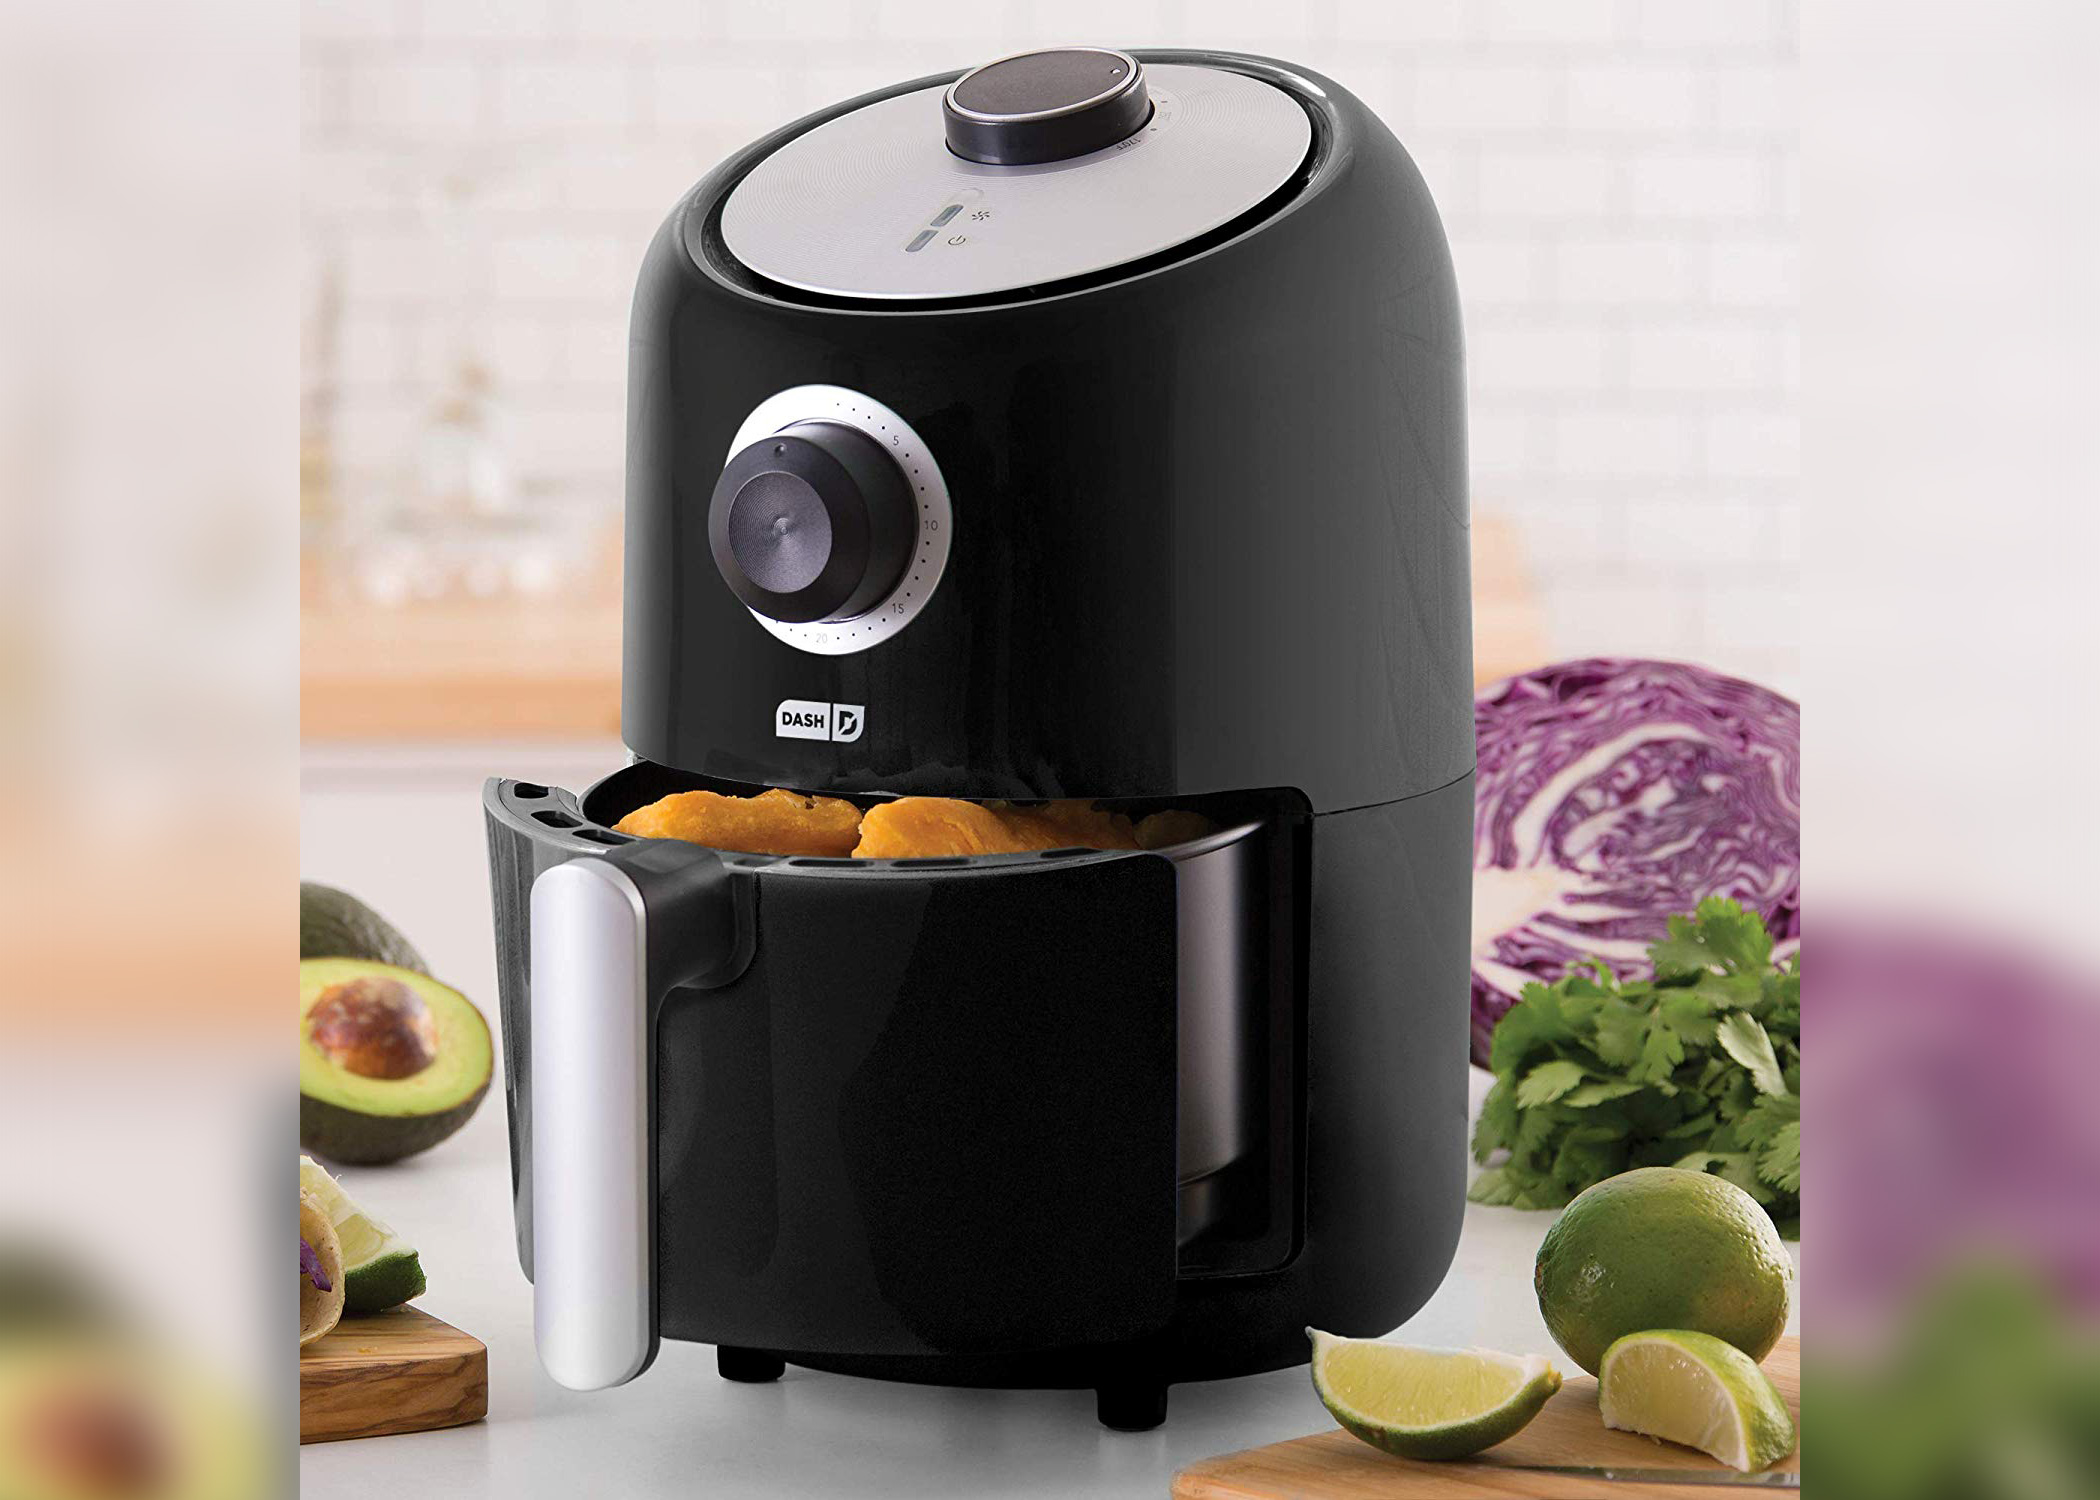 Black Friday came early for this 40 air fryer BGR